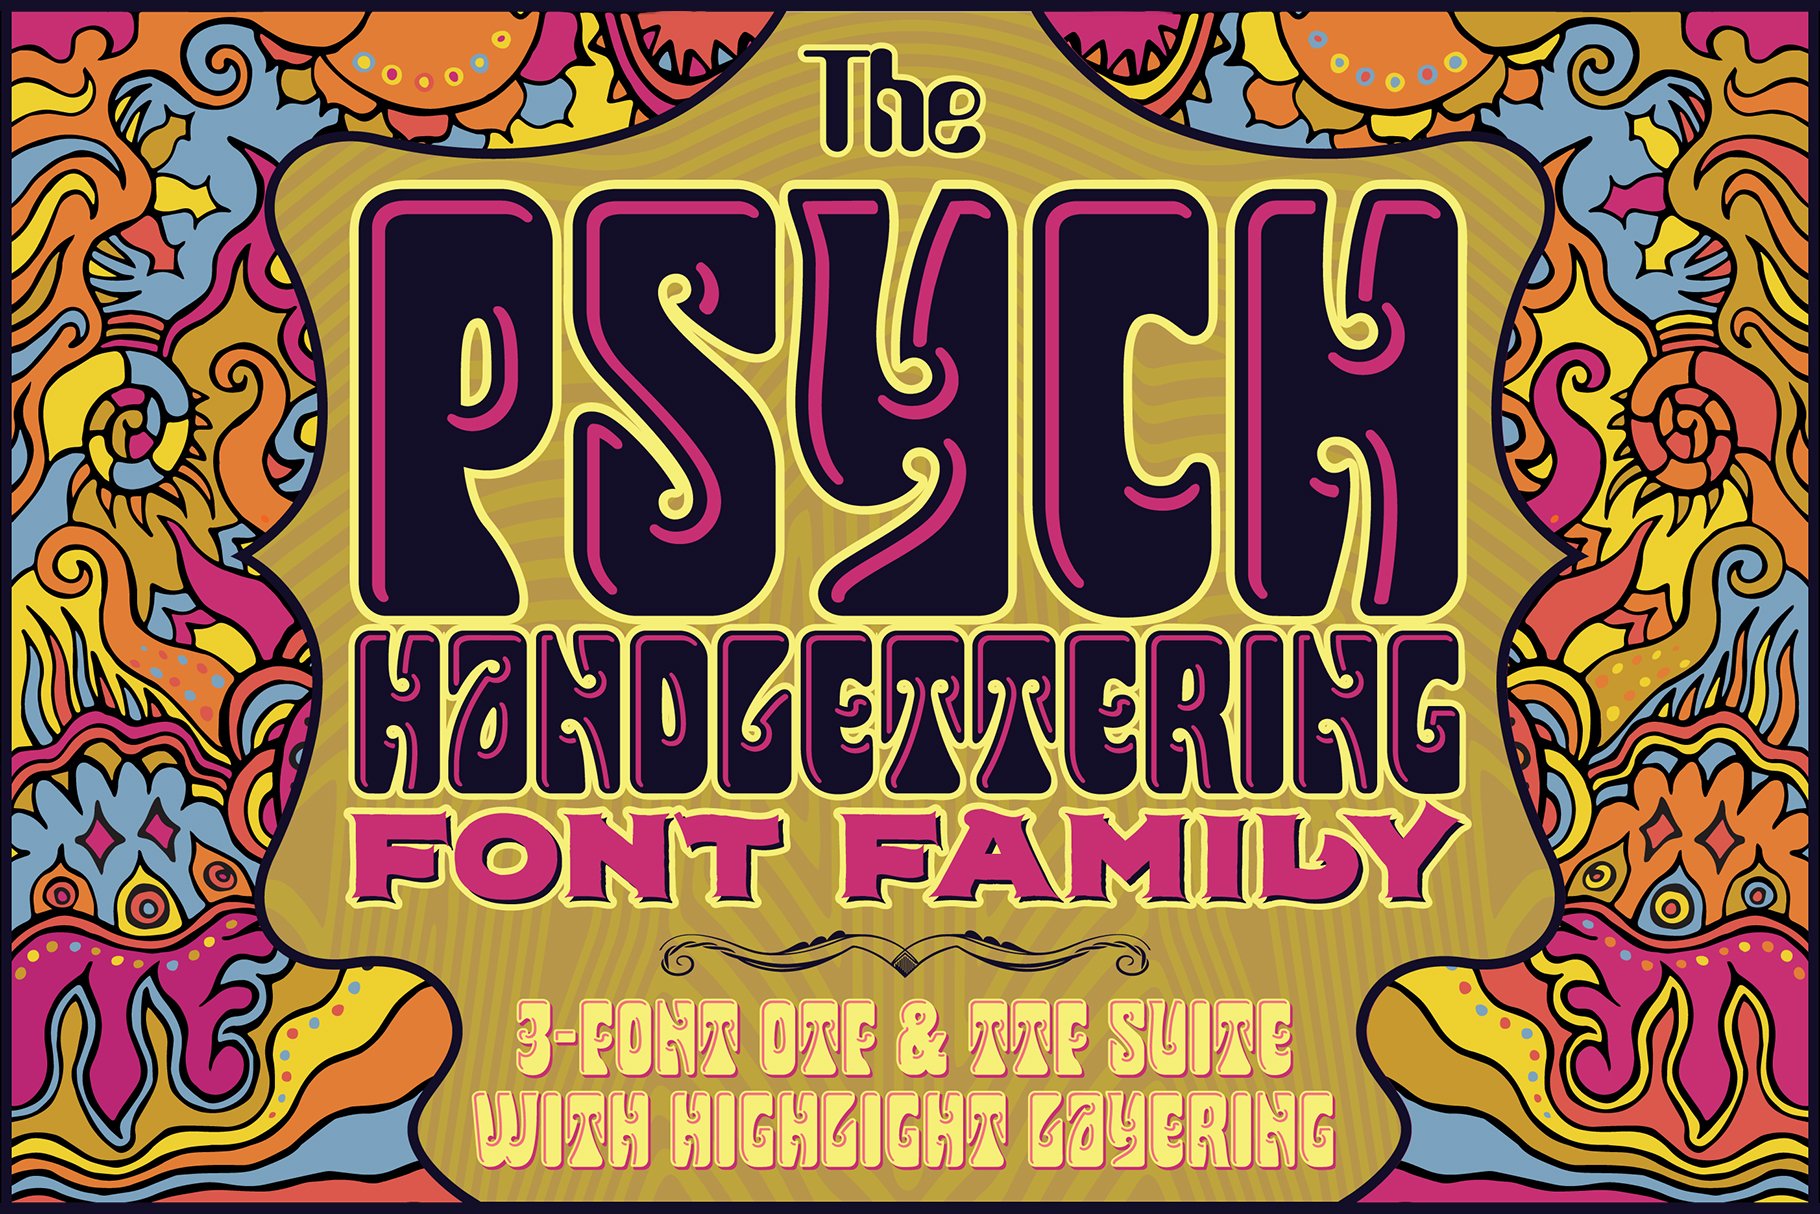 Psych Handlettering Font cover image.